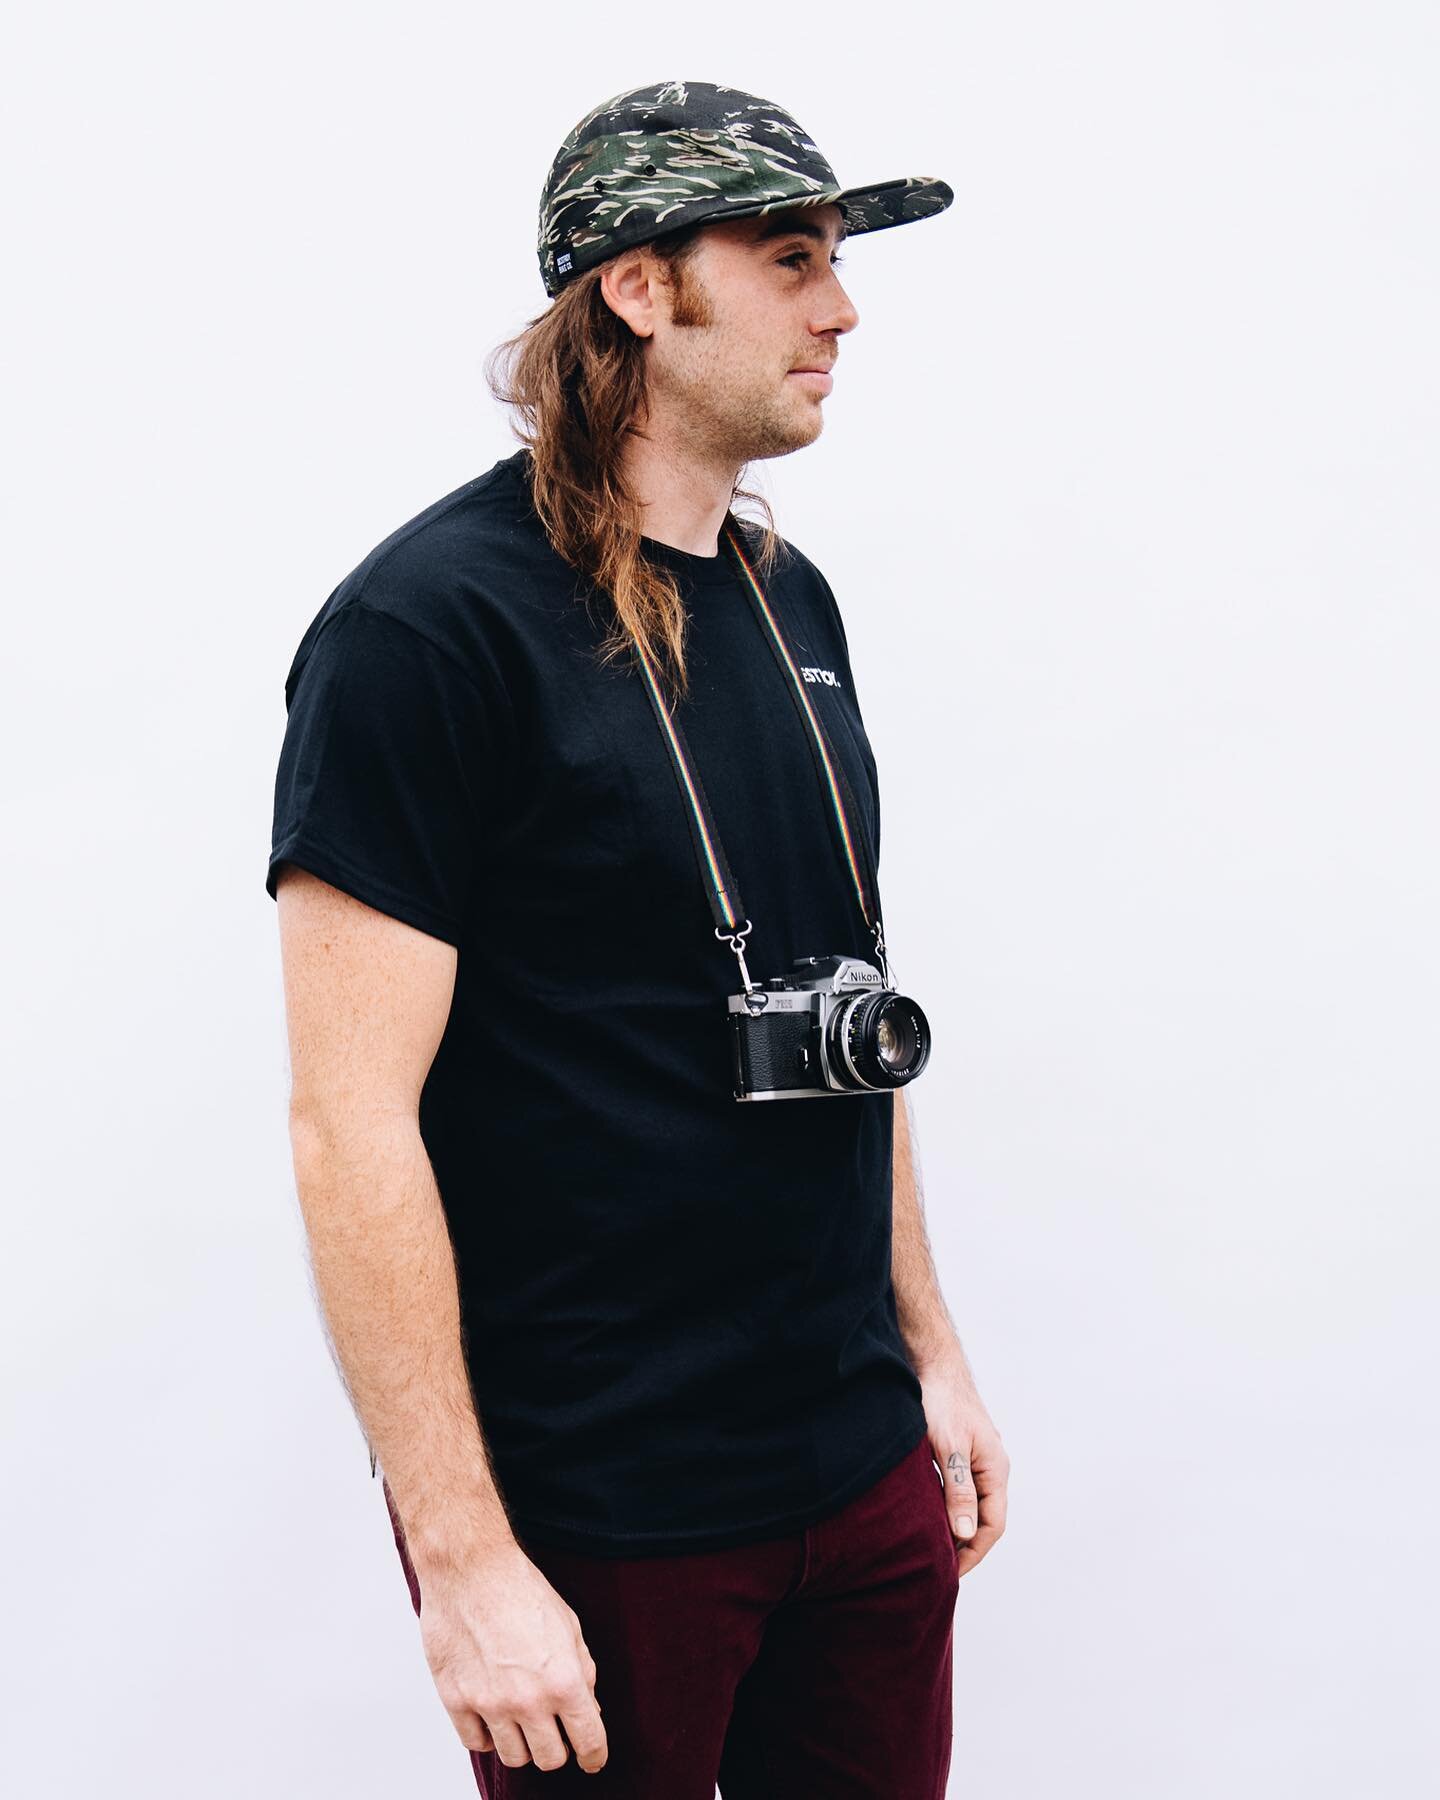 The Shop Logo T-Shirt
.
A classic Destroy logo on a midweight cotton short sleeve. Comfort while riding, durable for all shenanigans. With a lo-pro front chest logo this shirt is perfect for work in the shop or a simple go to daily.
.
.
PDX BUILT//AM